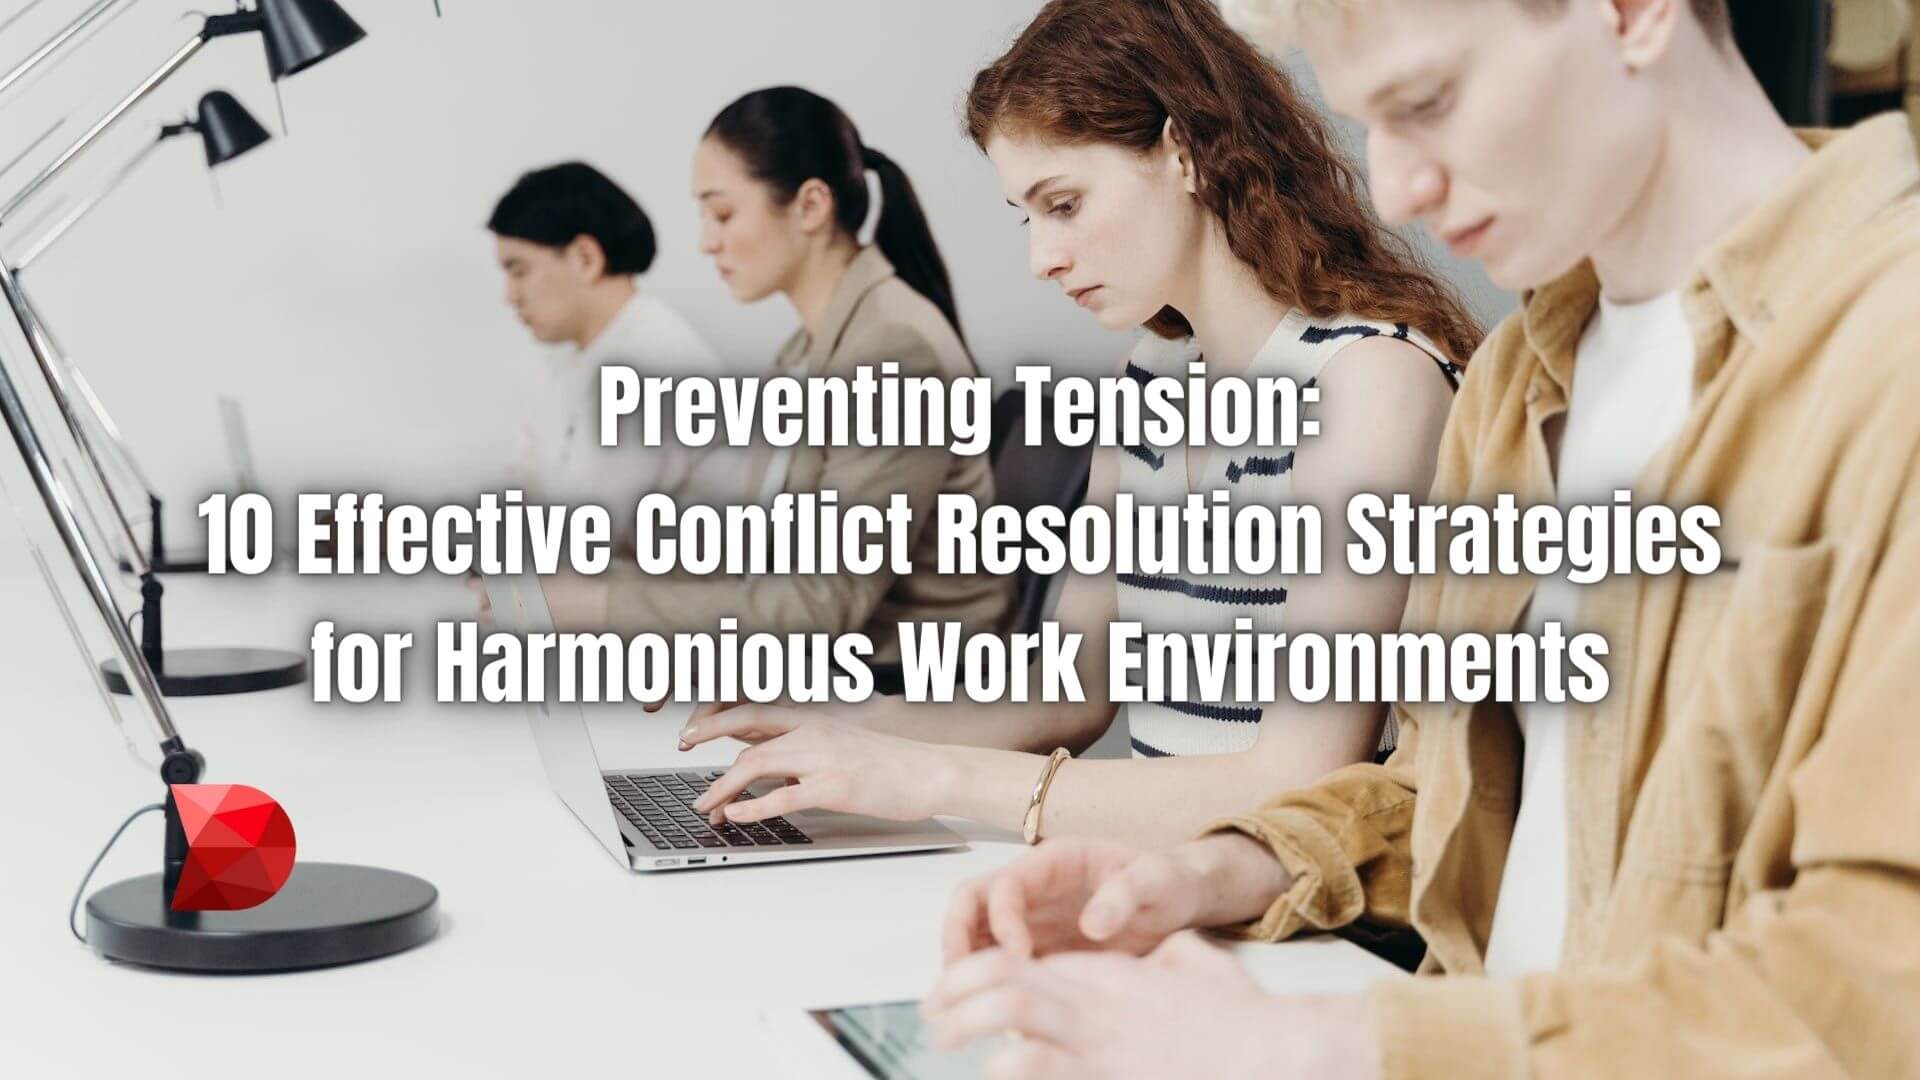 Unlock the key strategies for conflict resolution at work. Click here to learn 10 effective methods to cultivate a harmonious workplace.